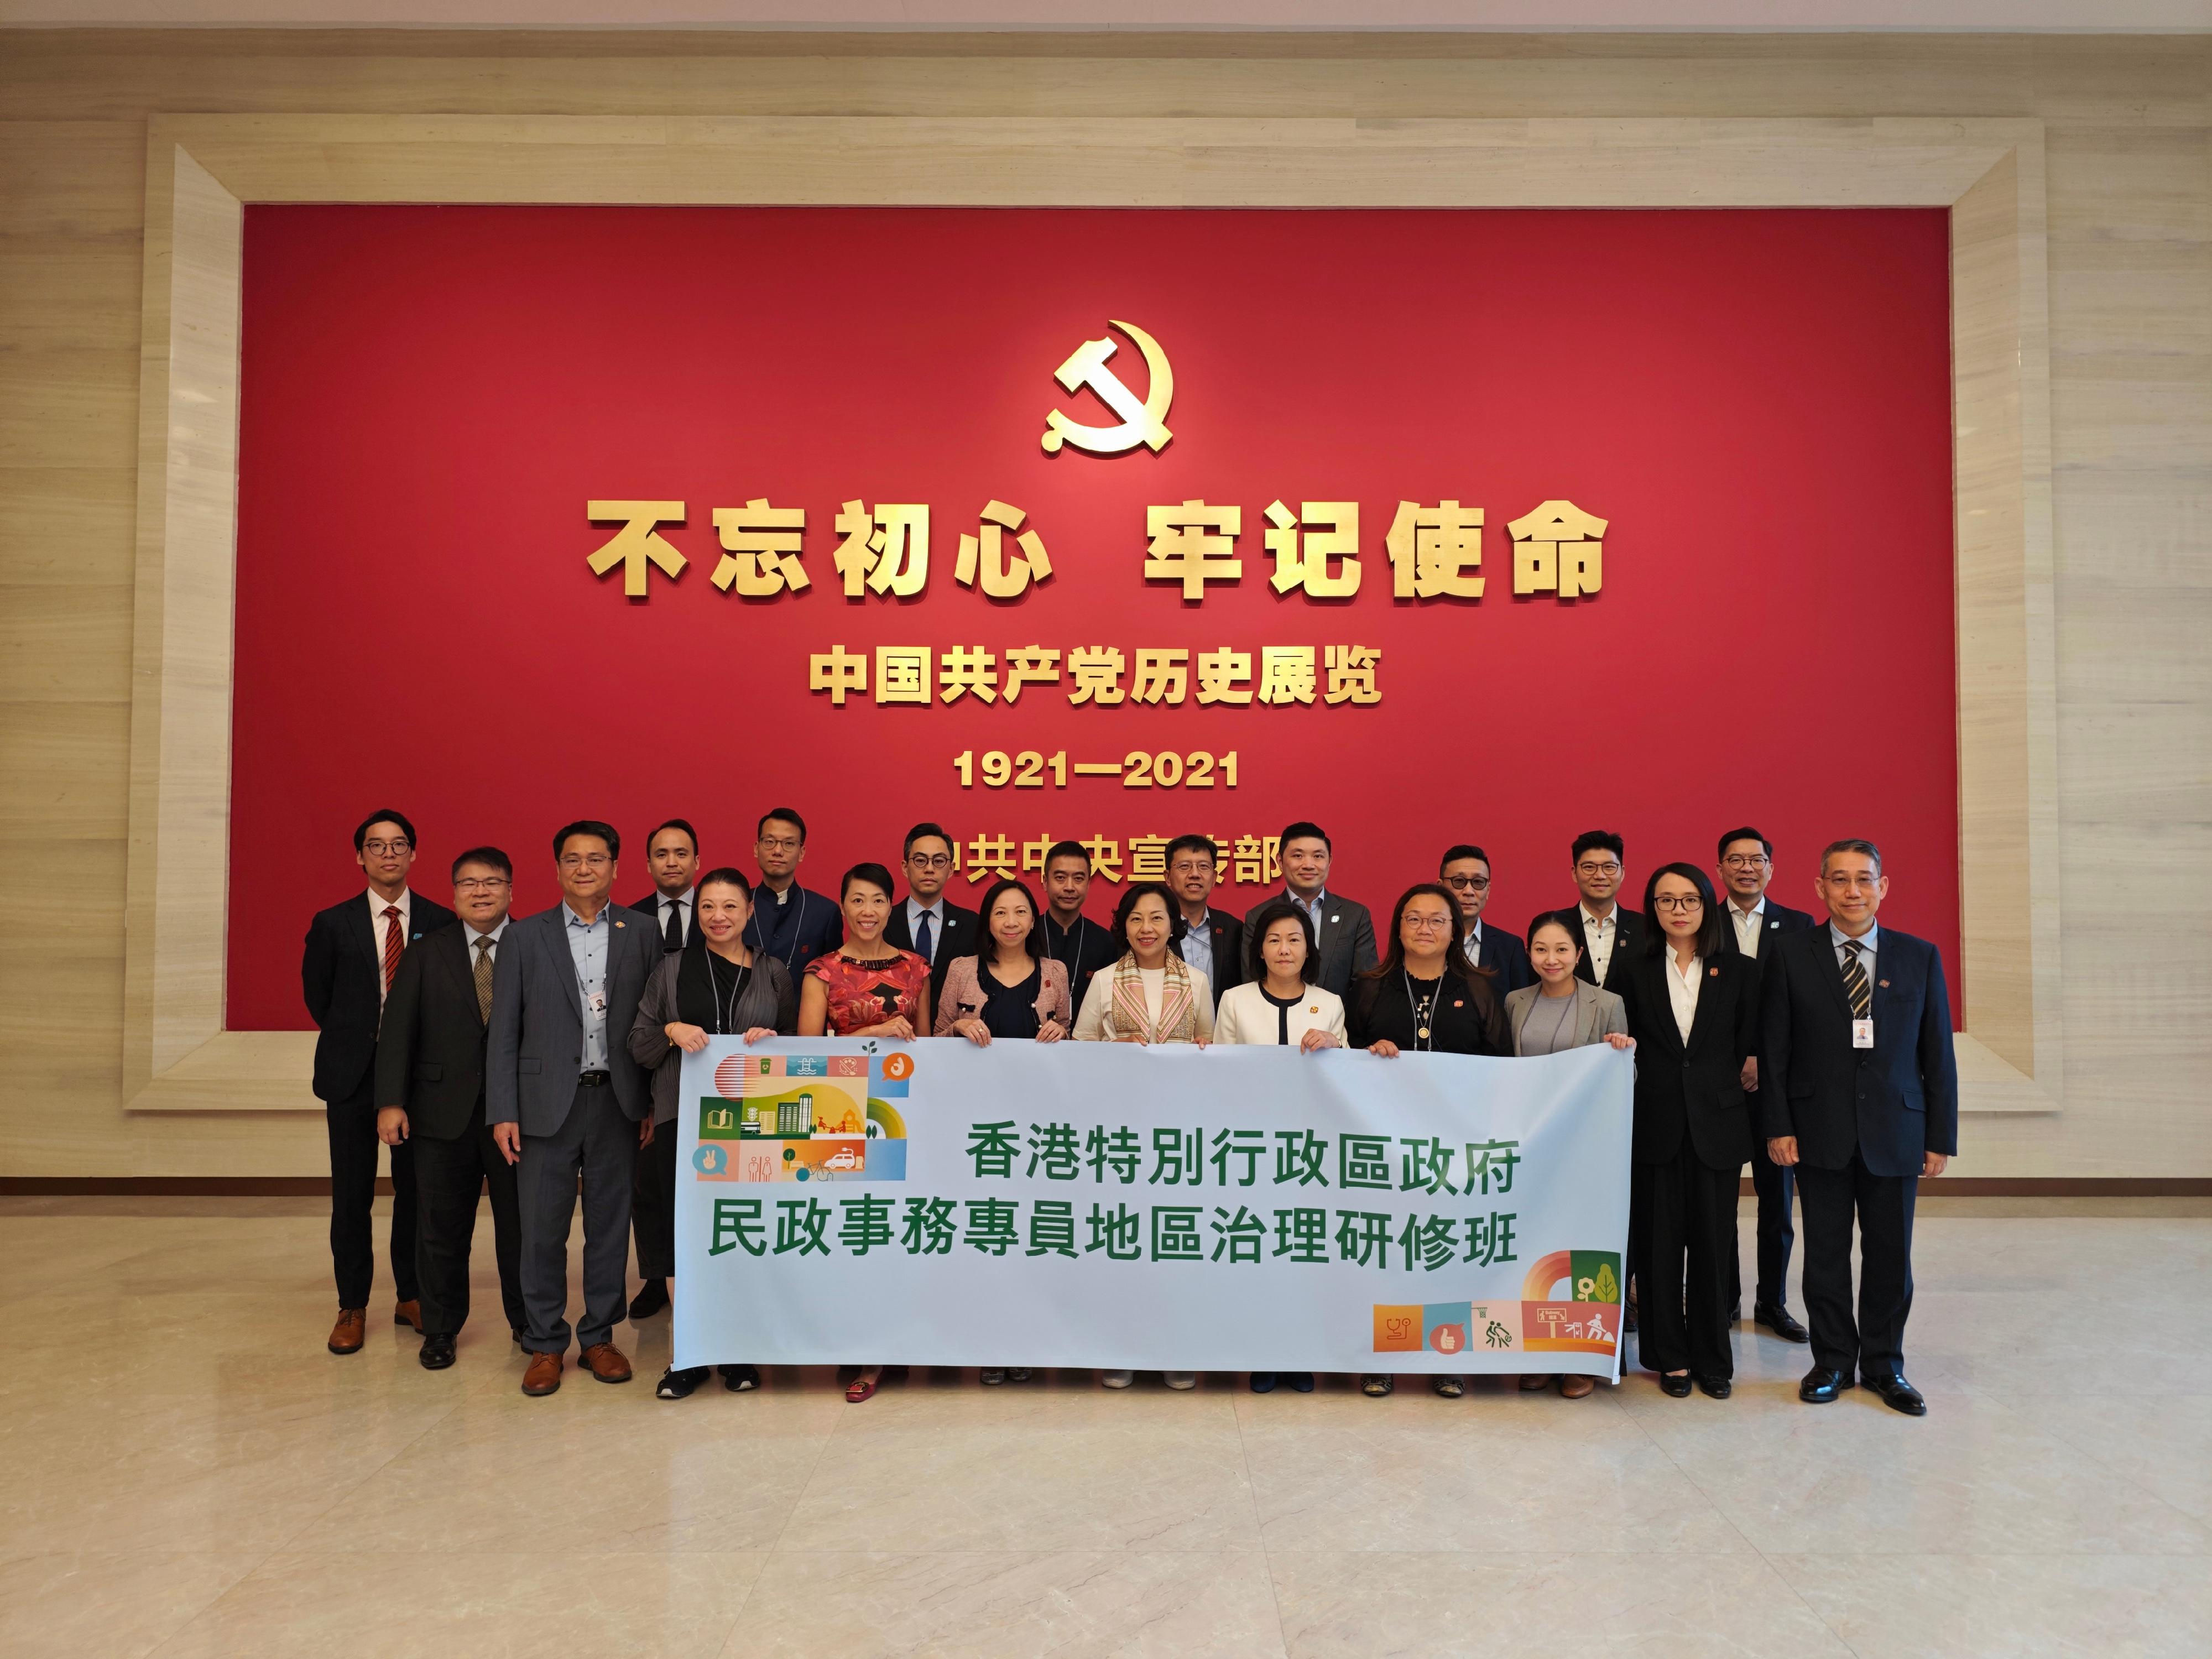 The delegation of the District Officers of the Hong Kong Special Administrative Region Government led by the Secretary for Home and Youth Affairs, Miss Alice Mak, continued its study programme in Beijing on district governance today (April 18). Photo shows Miss Mak (front row, sixth right) and the delegation visiting the Museum of the Communist Party of China to obtain a deeper understanding of the 100-year history of the Communist Party of China.